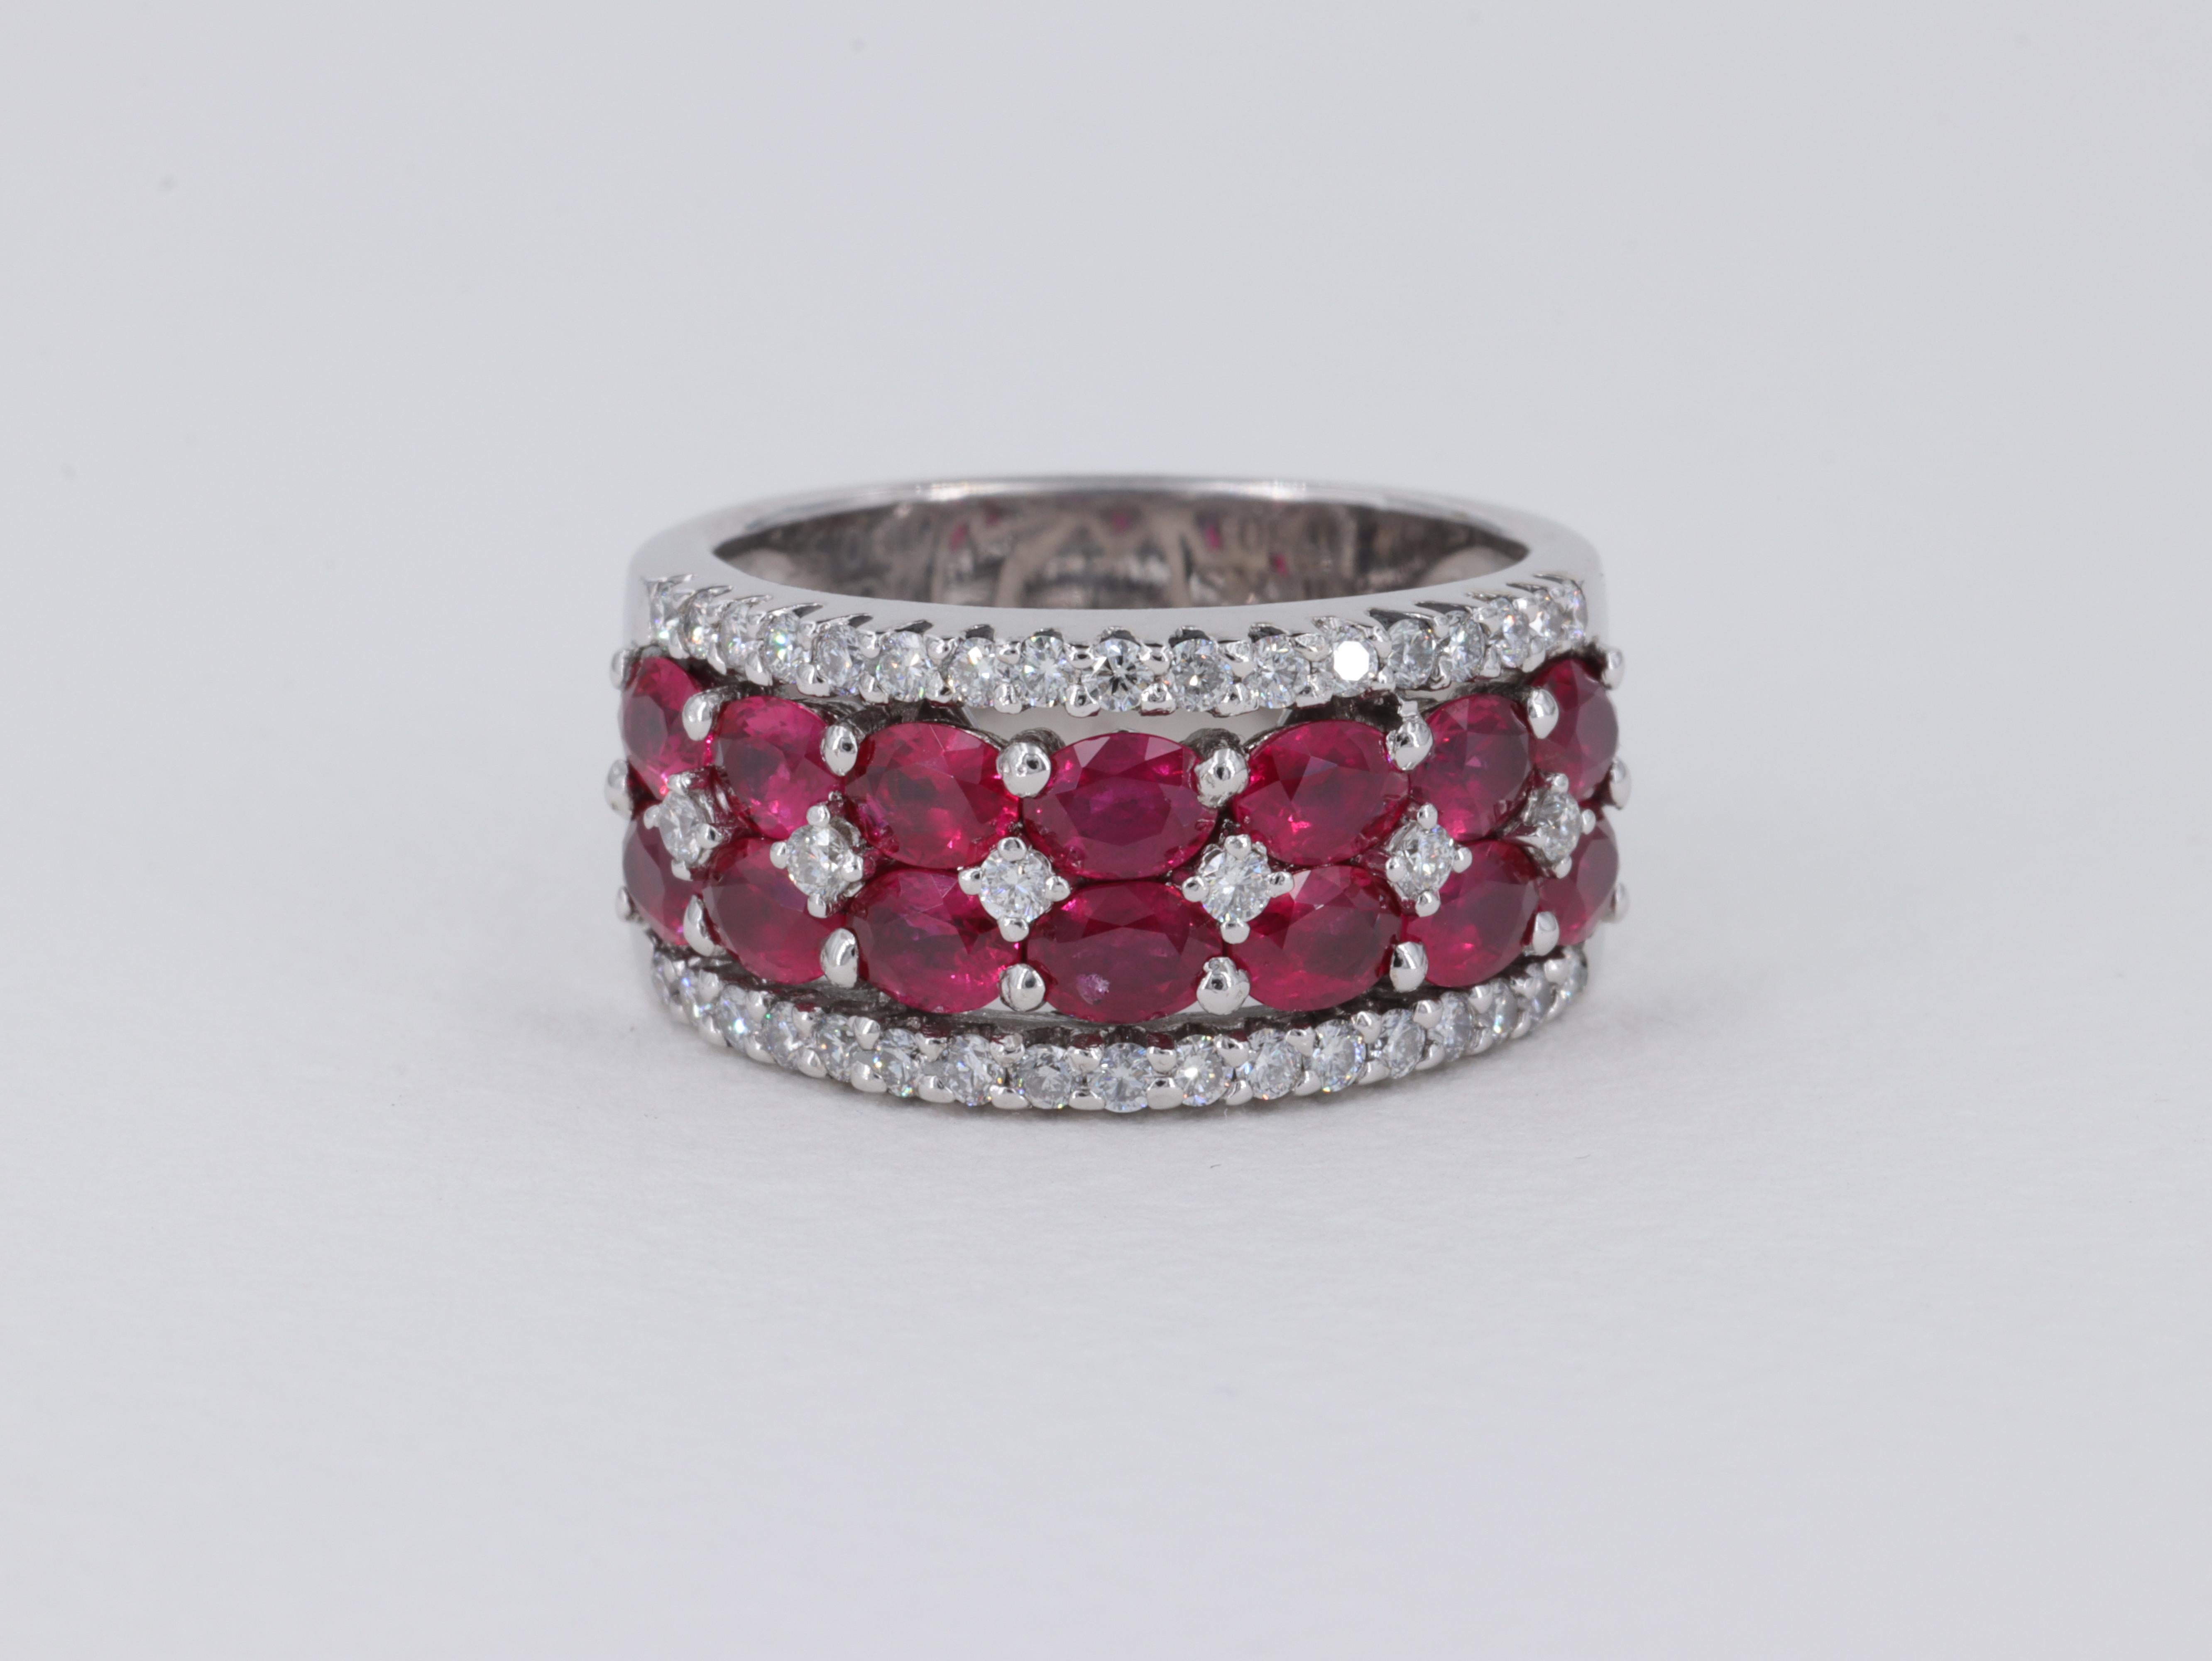 Birks Oval Shaped Natural Ruby and Diamond Wide Band Ring in 18 Karat White Gold
     
Stones: 

Rubies - Natural - 2.85 Carats 
Color - Vivid Red 

Diamonds - 0.55 Carats
Color - F to H 
Clarity - VS1 to VS2 

Ring:

Metal - 18 Karat White